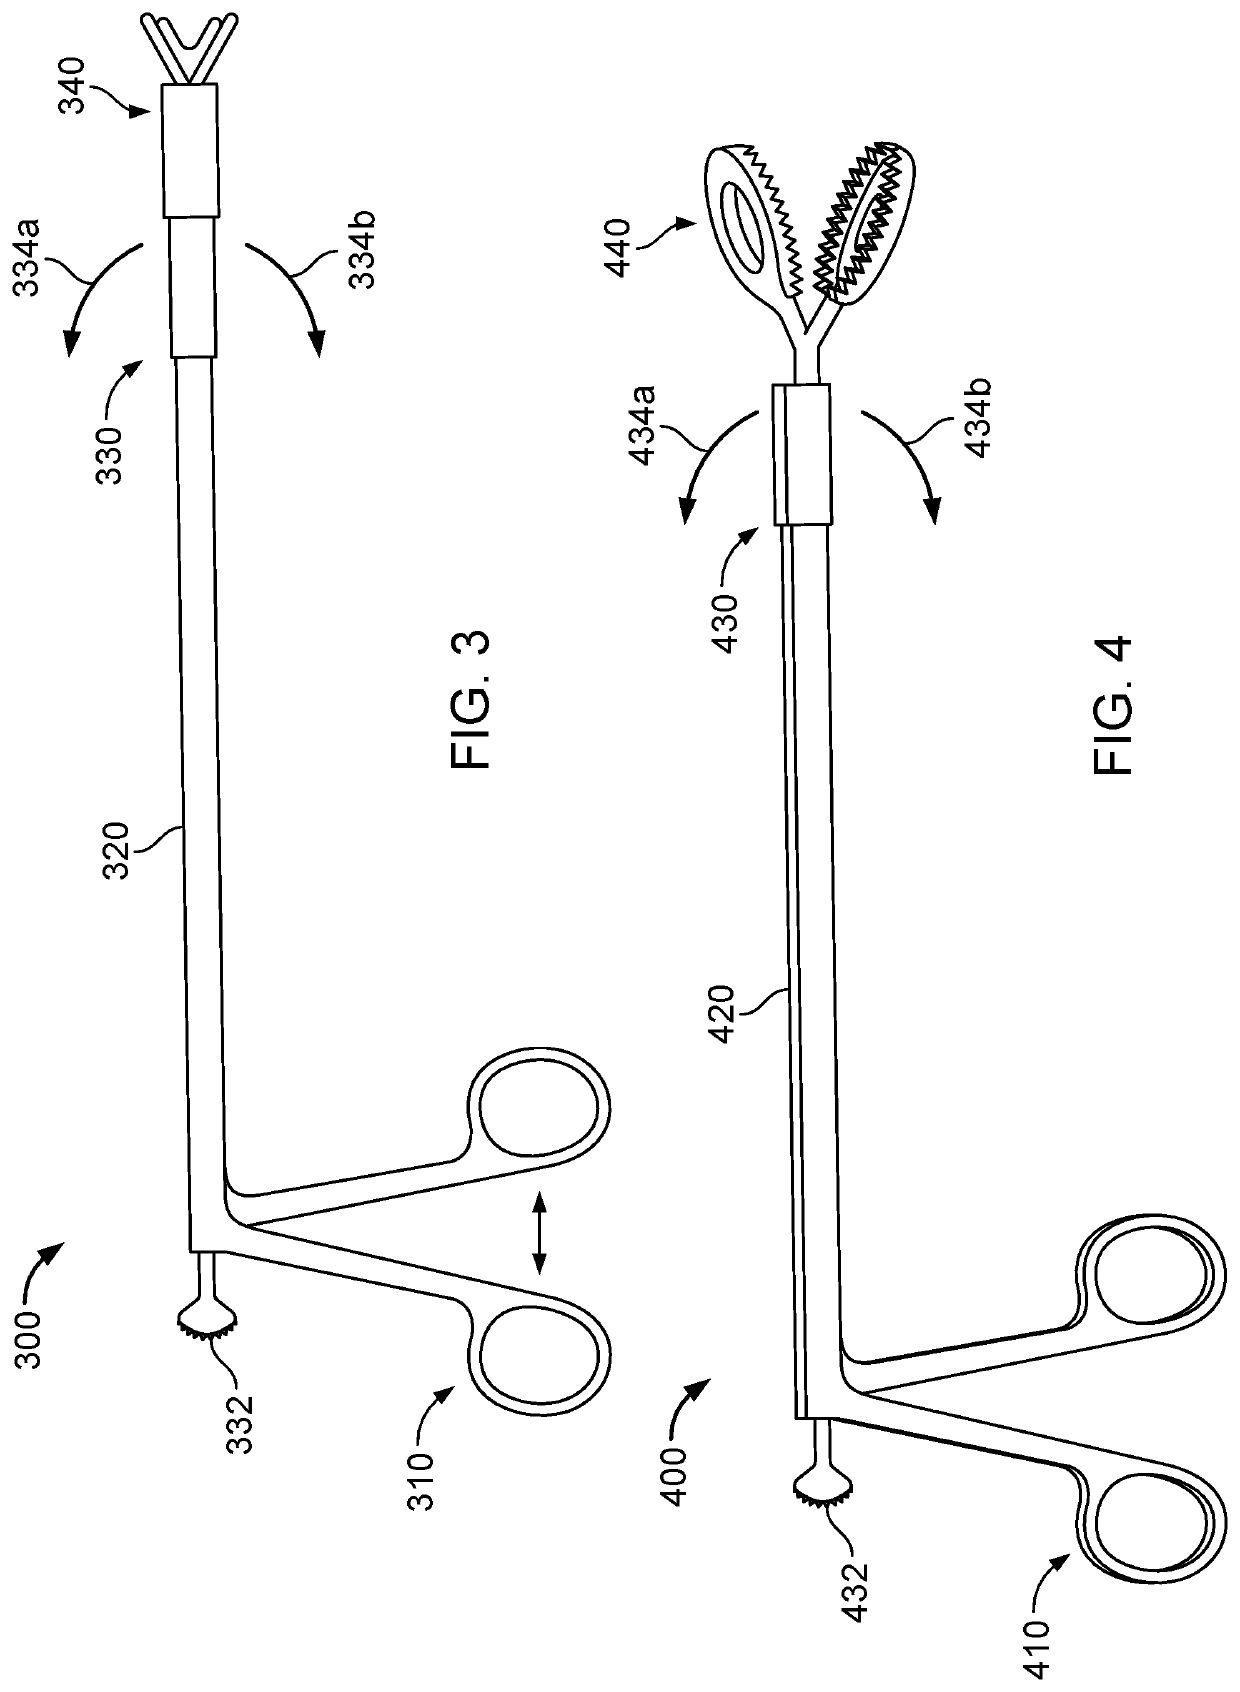 Transoral surgical devices and methods